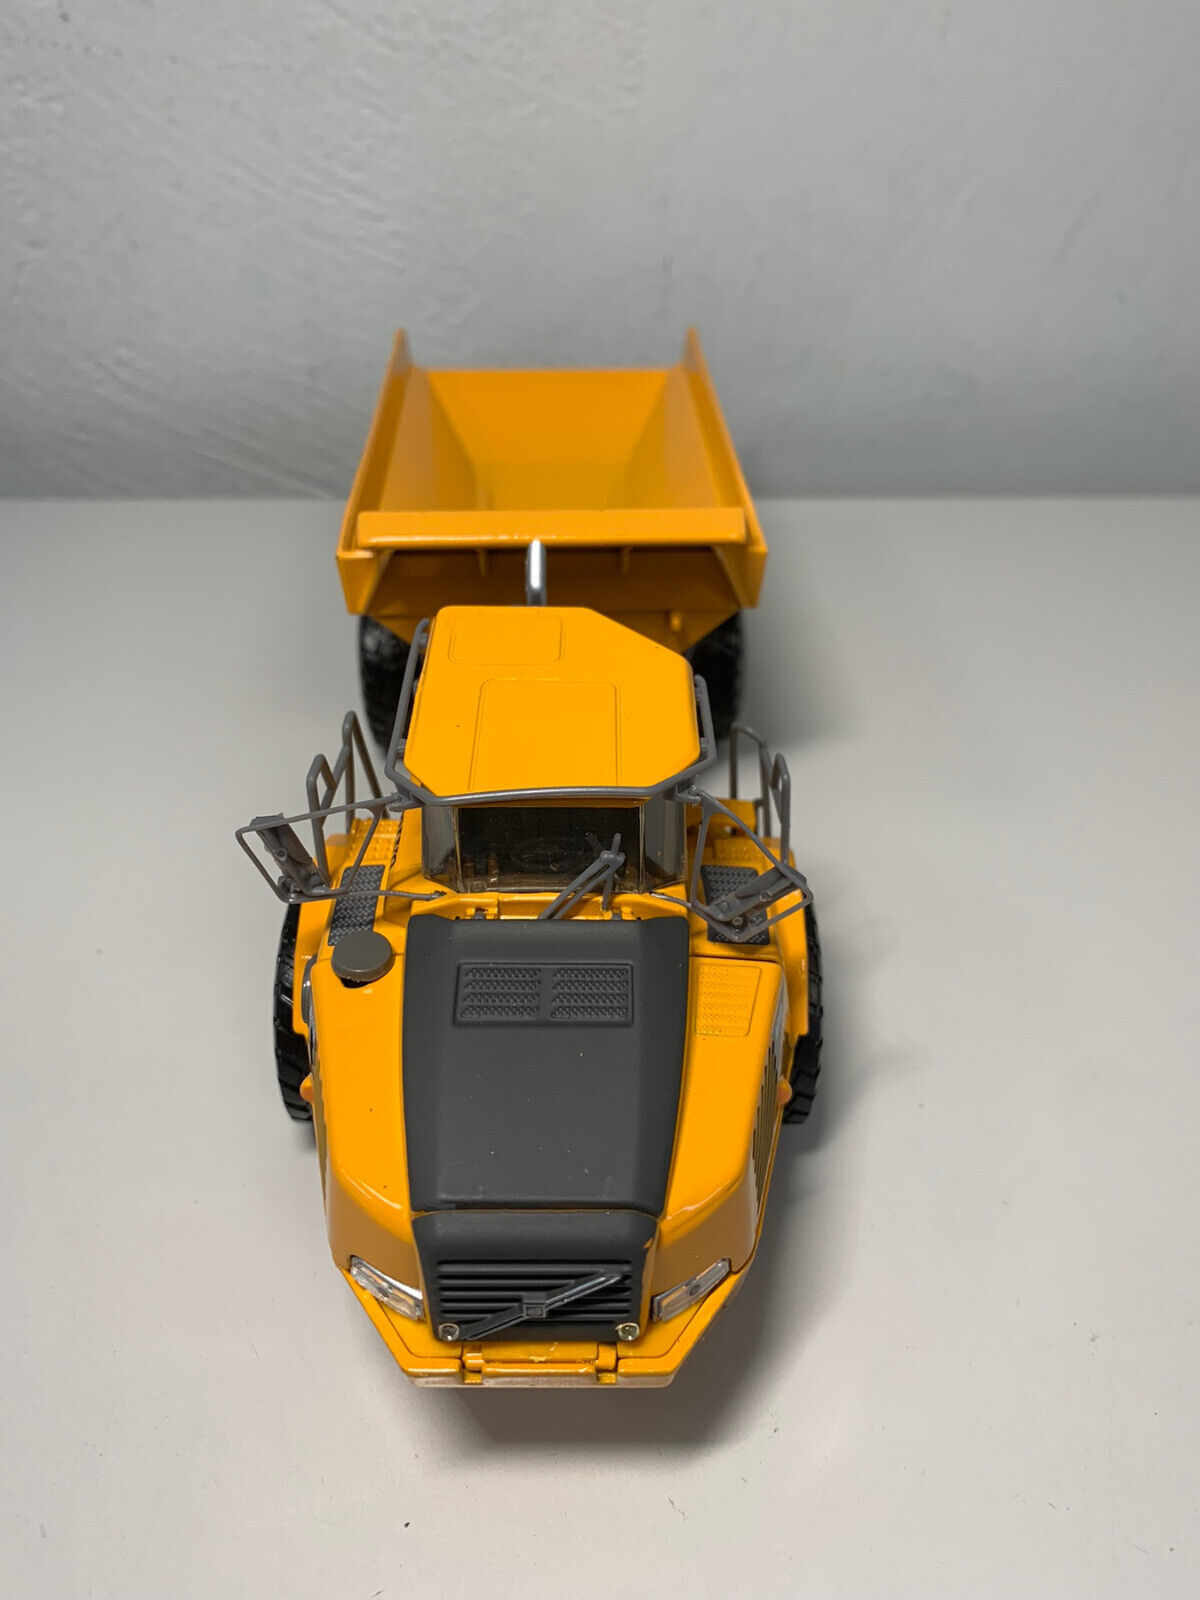 10267 Volvo A40D Articulated Truck 1:50 Scale (Discontinued Model)